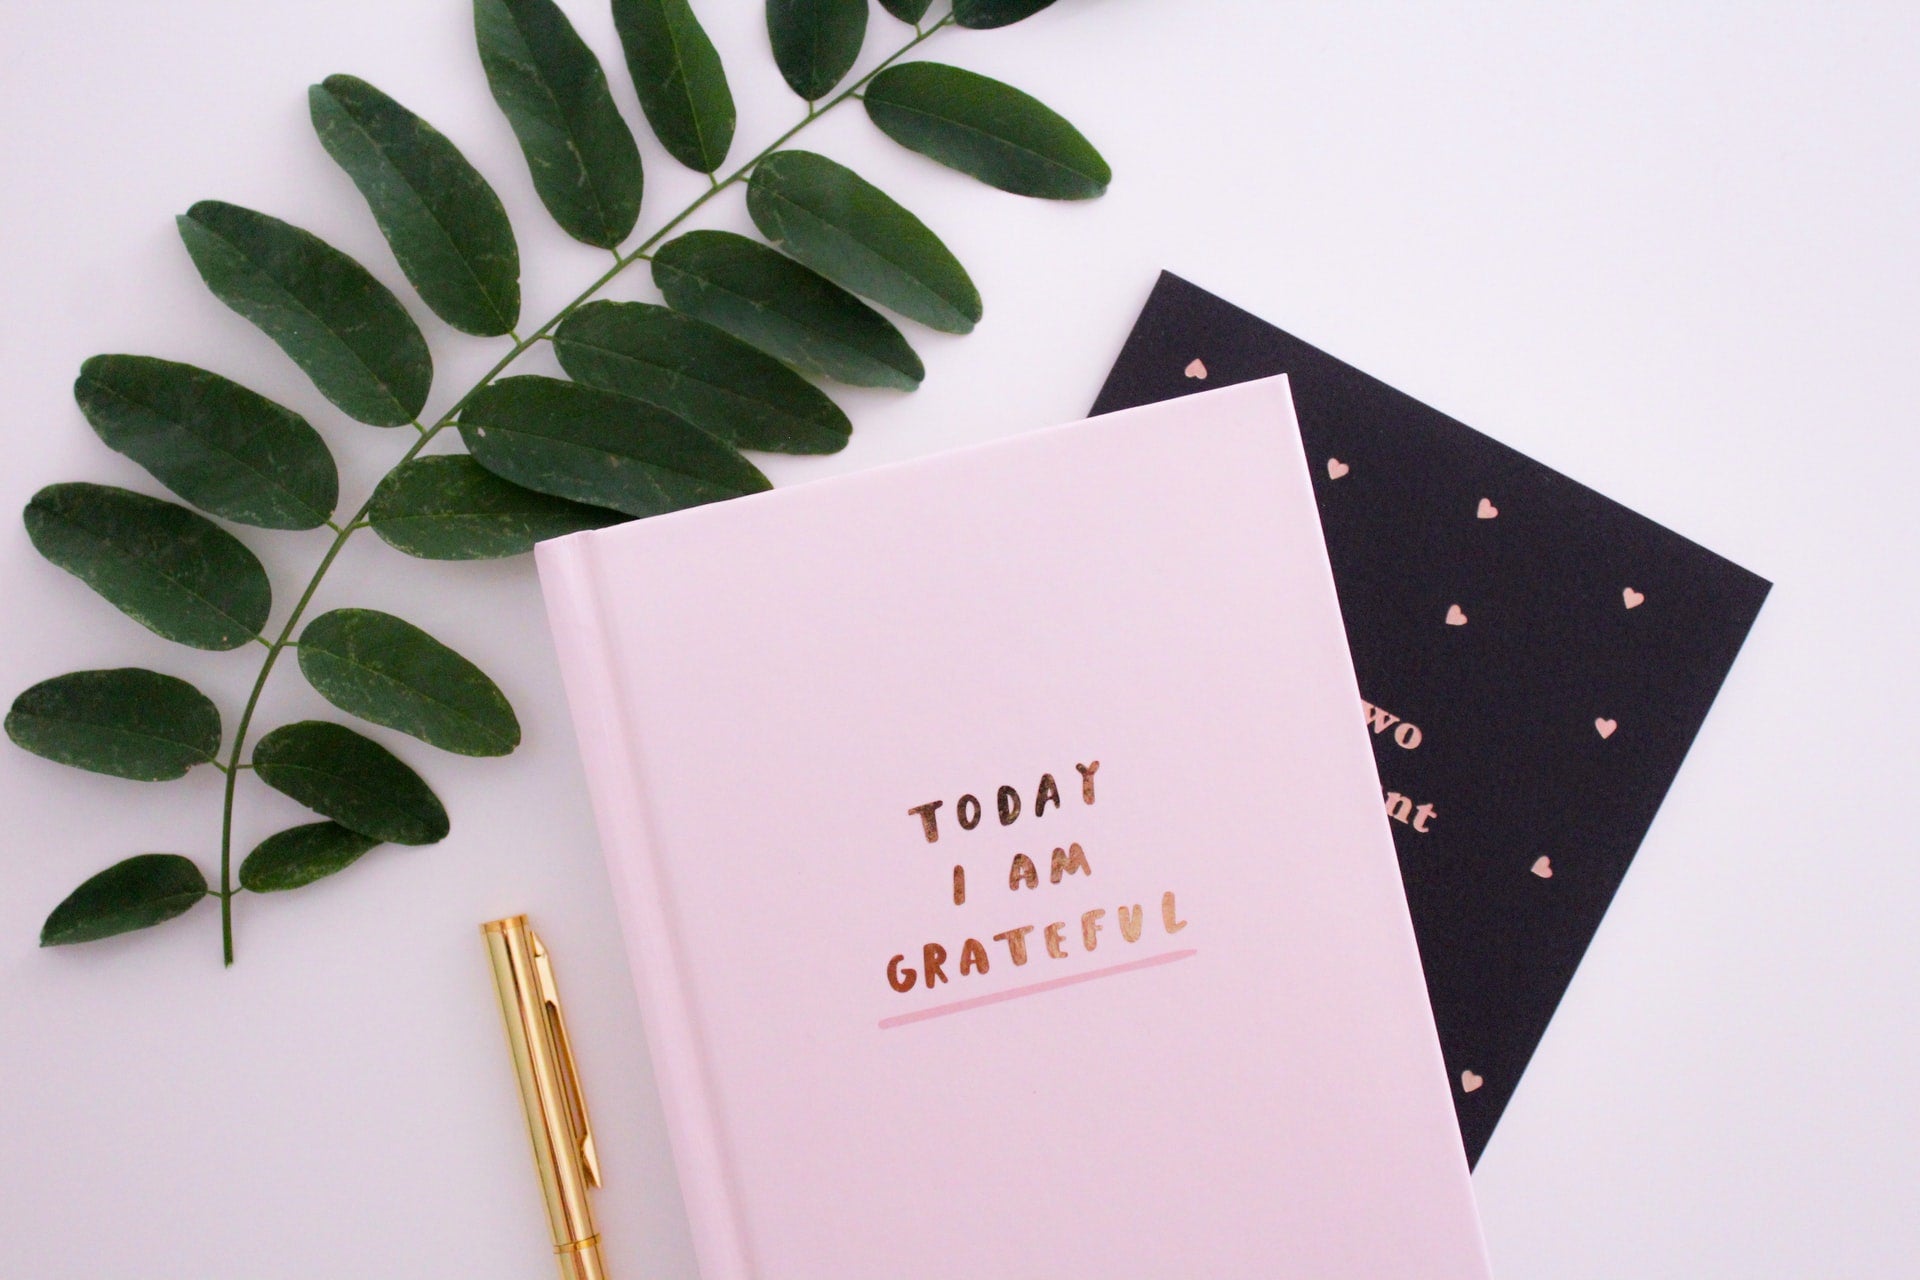 A gratitude journal given as a gift for someone with anxiety sits beside some greenery.